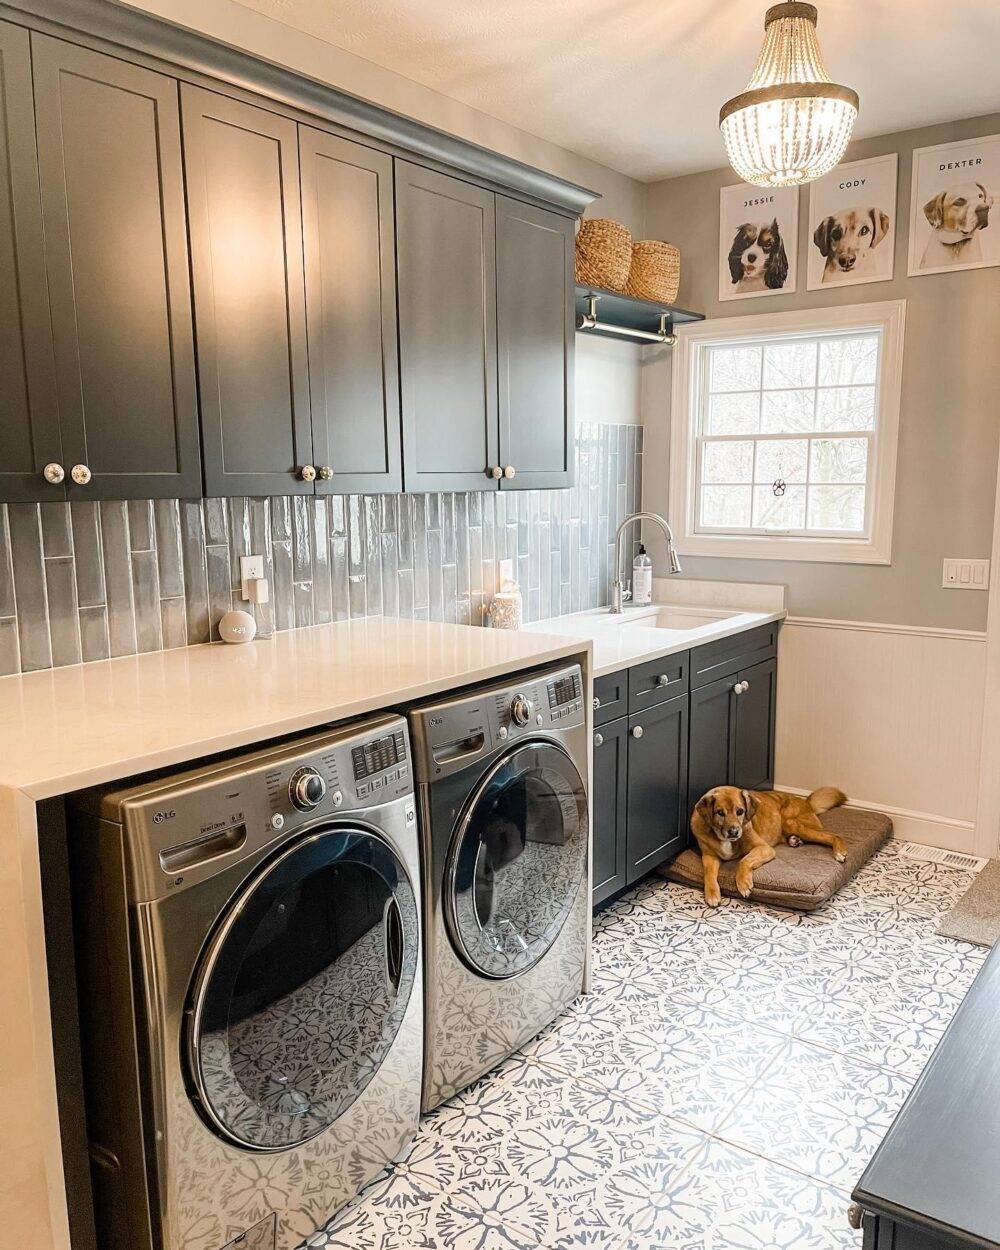 Laundry room featuring blue and white patterned tile floor, lounging upon which is a cute dog. 